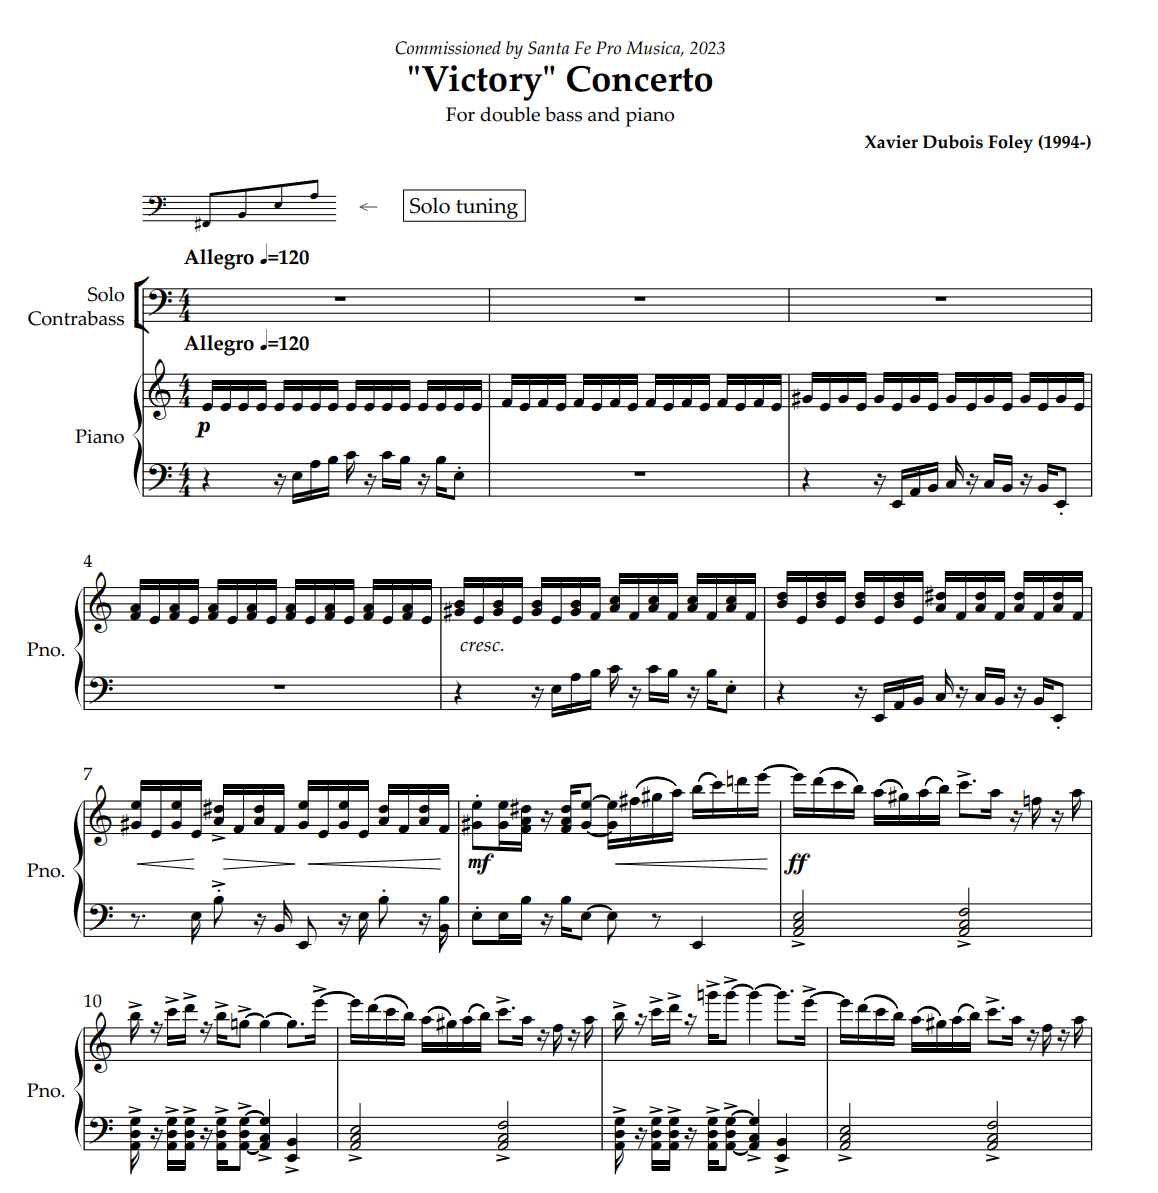 Victory Concerto Piano Reduction by Xavier Foley